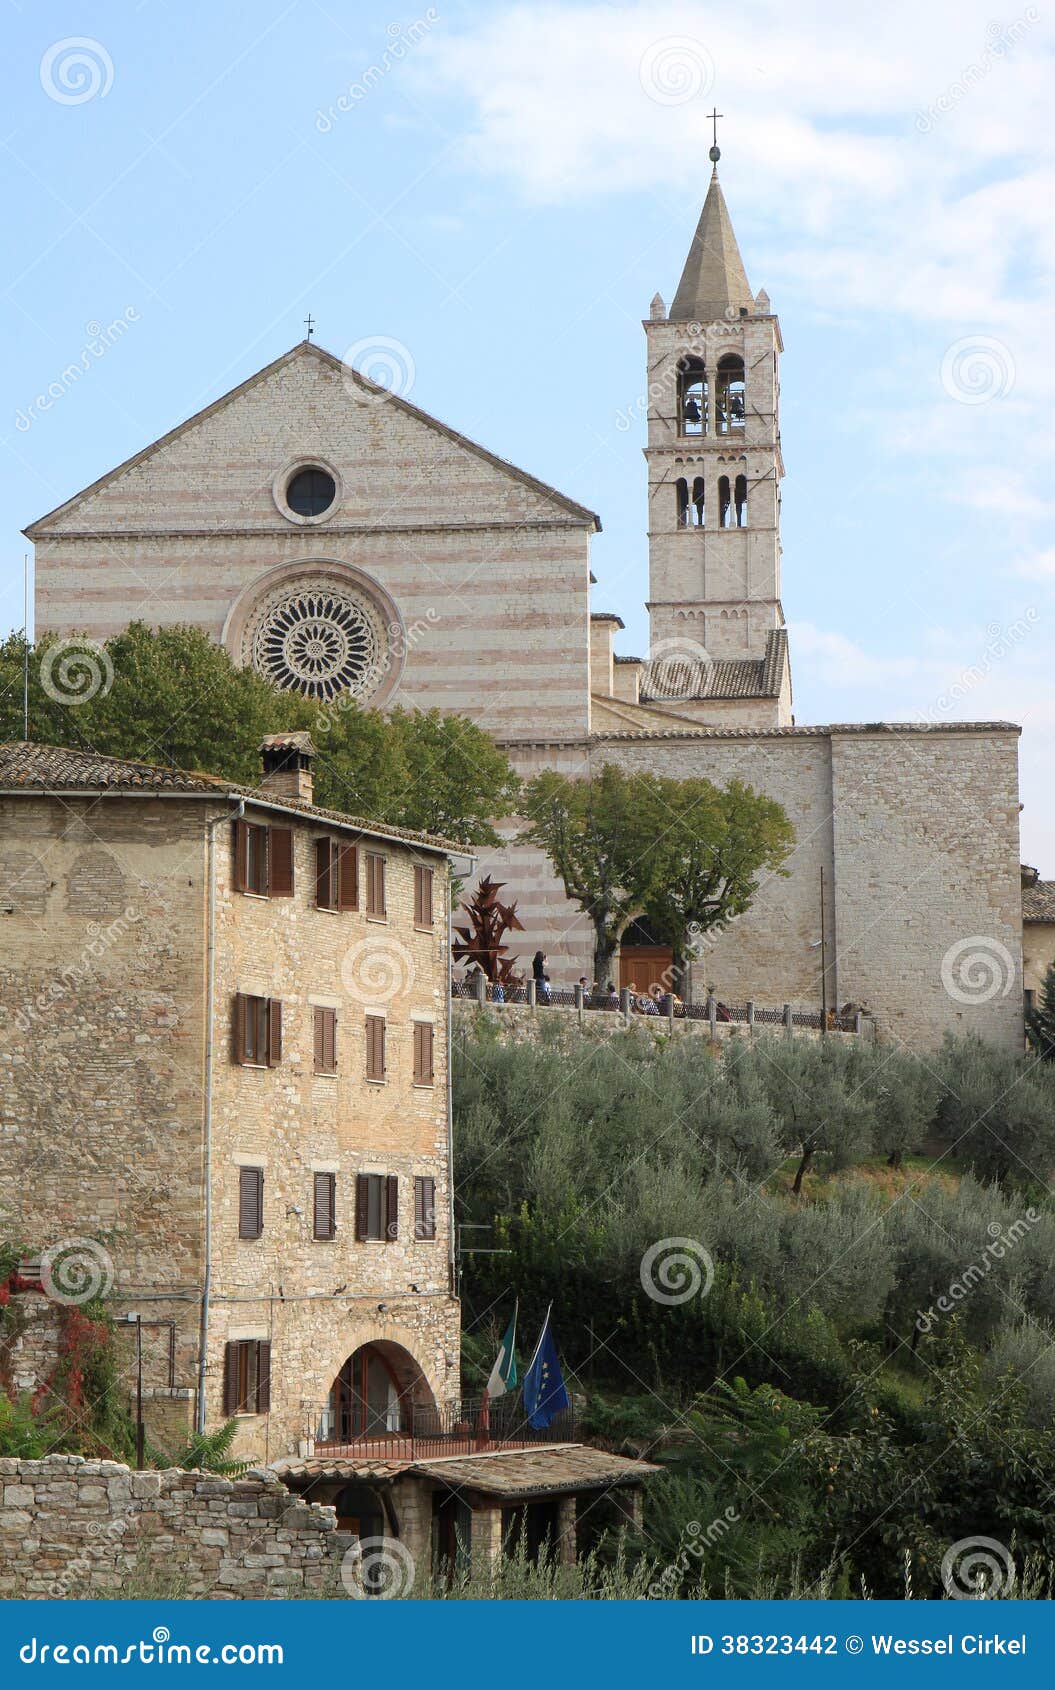 Basilica Of Saint Clare In Assisi Italy Editorial Photography Image Of Church Arches 38323442